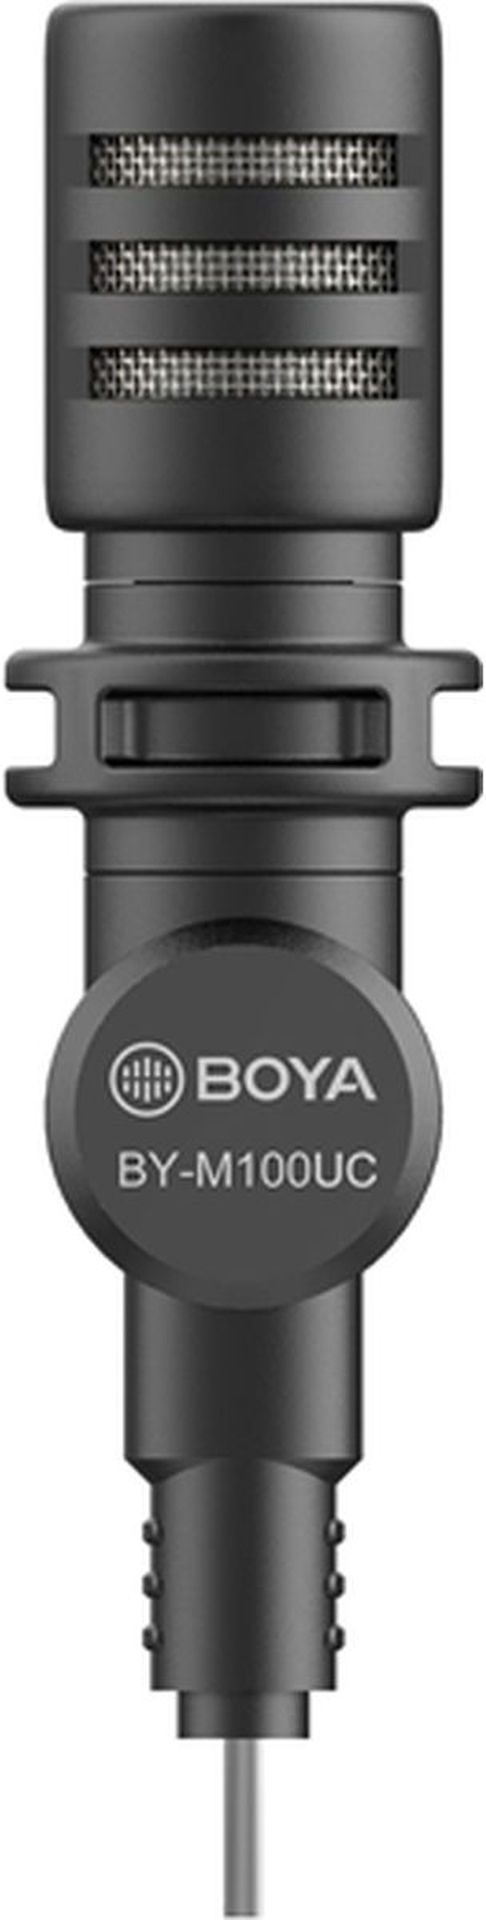 Boya BY-M100UC Omni Directional Mic For Type-C Devices